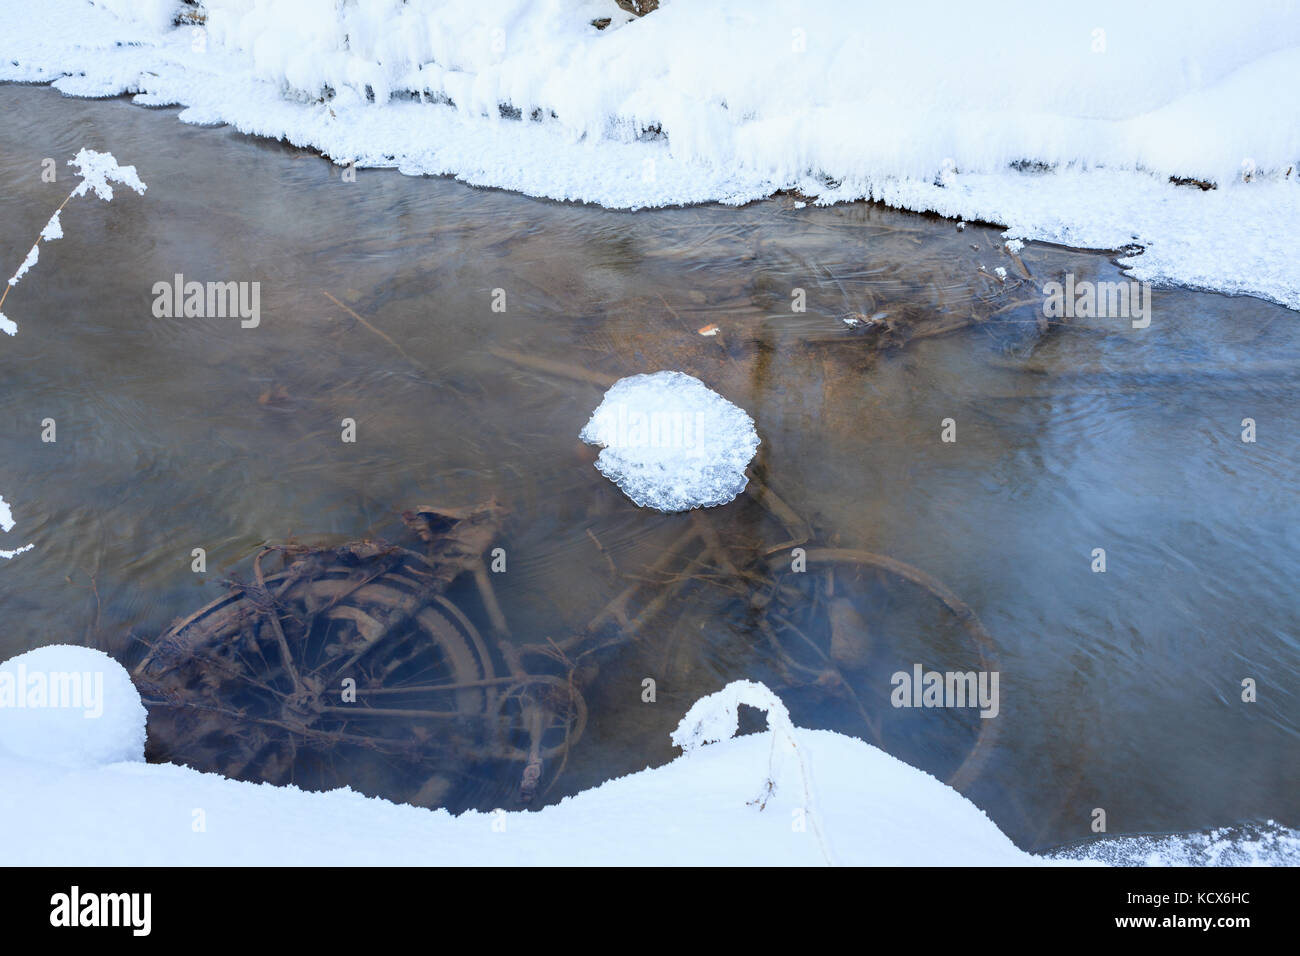 Abandoned bicycle in small stream Stock Photo